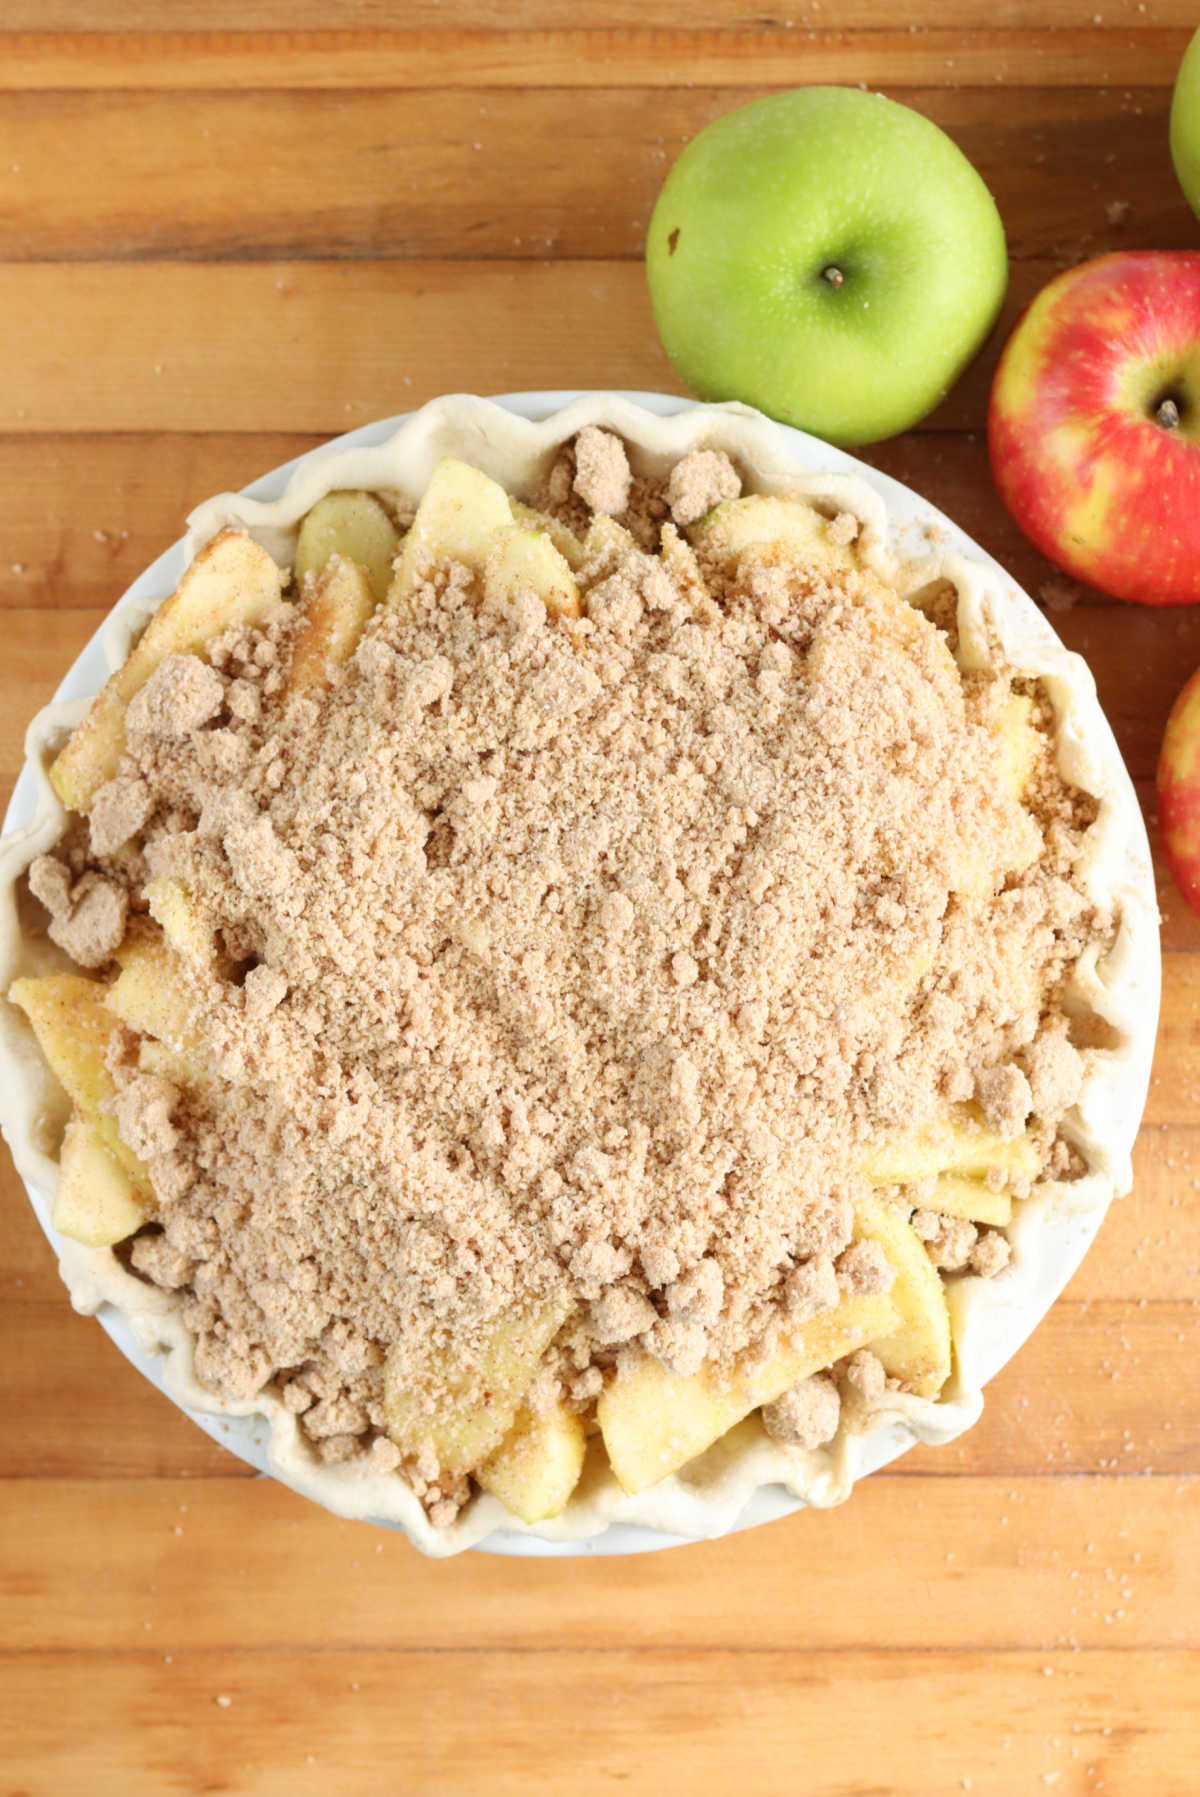 Unbaked apple pie with crumb topping on butcher block, apples around.